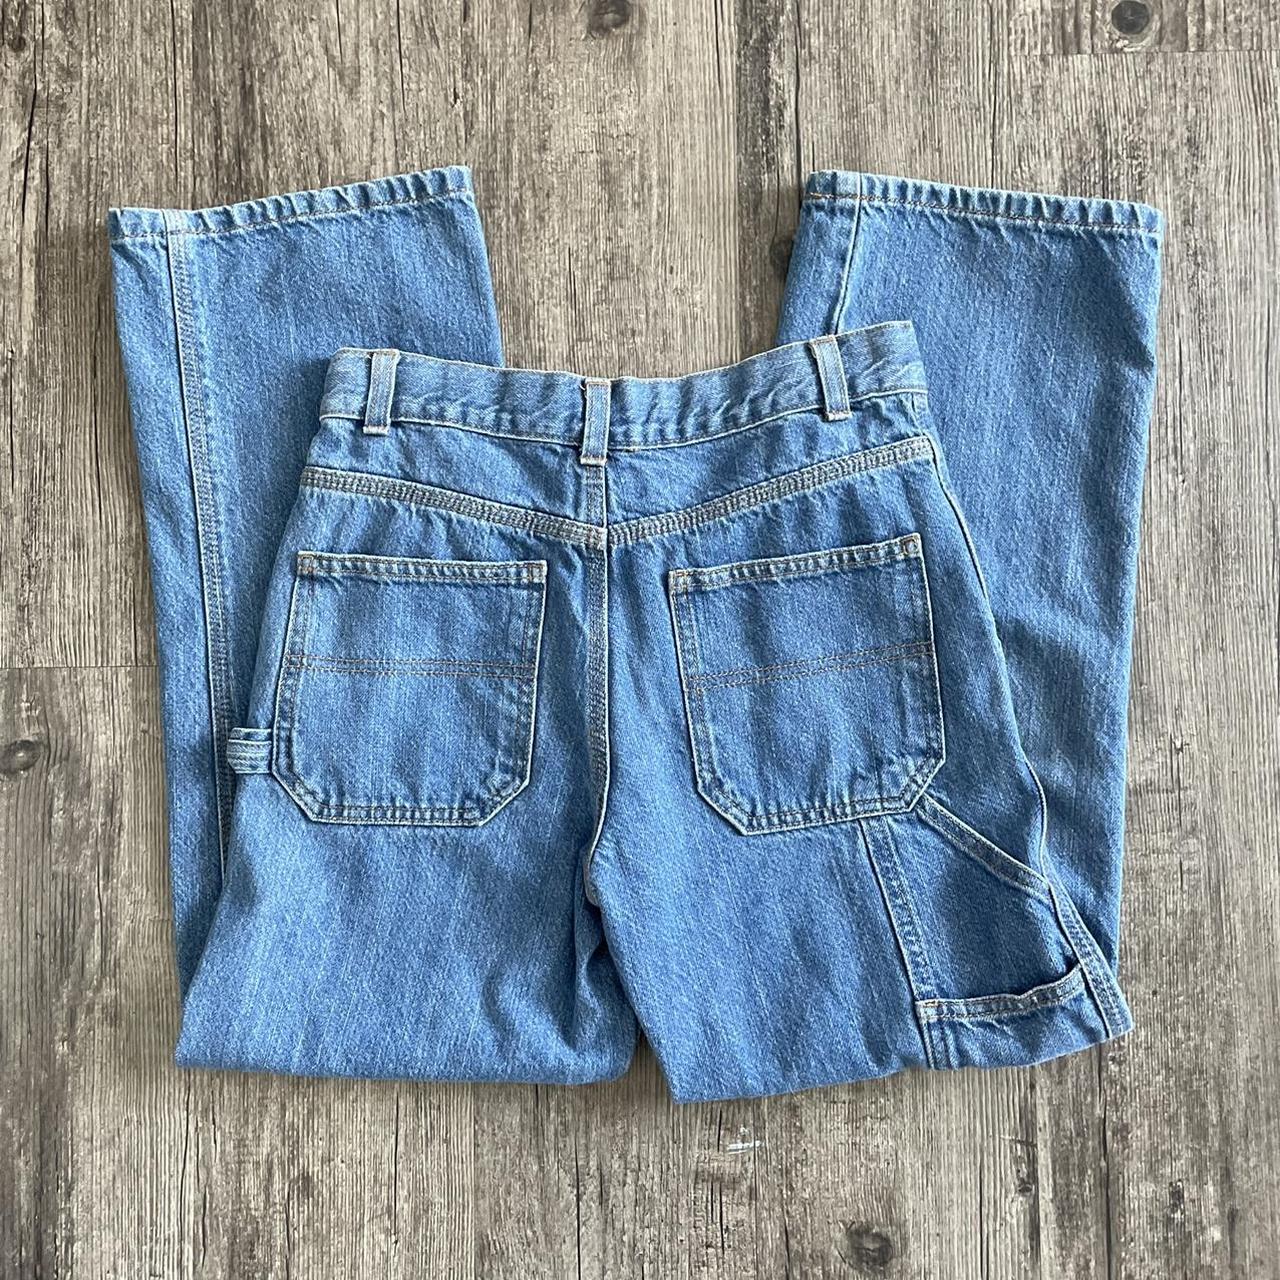 Y2k Cargos early 2000s carpenter jeans from faded... - Depop